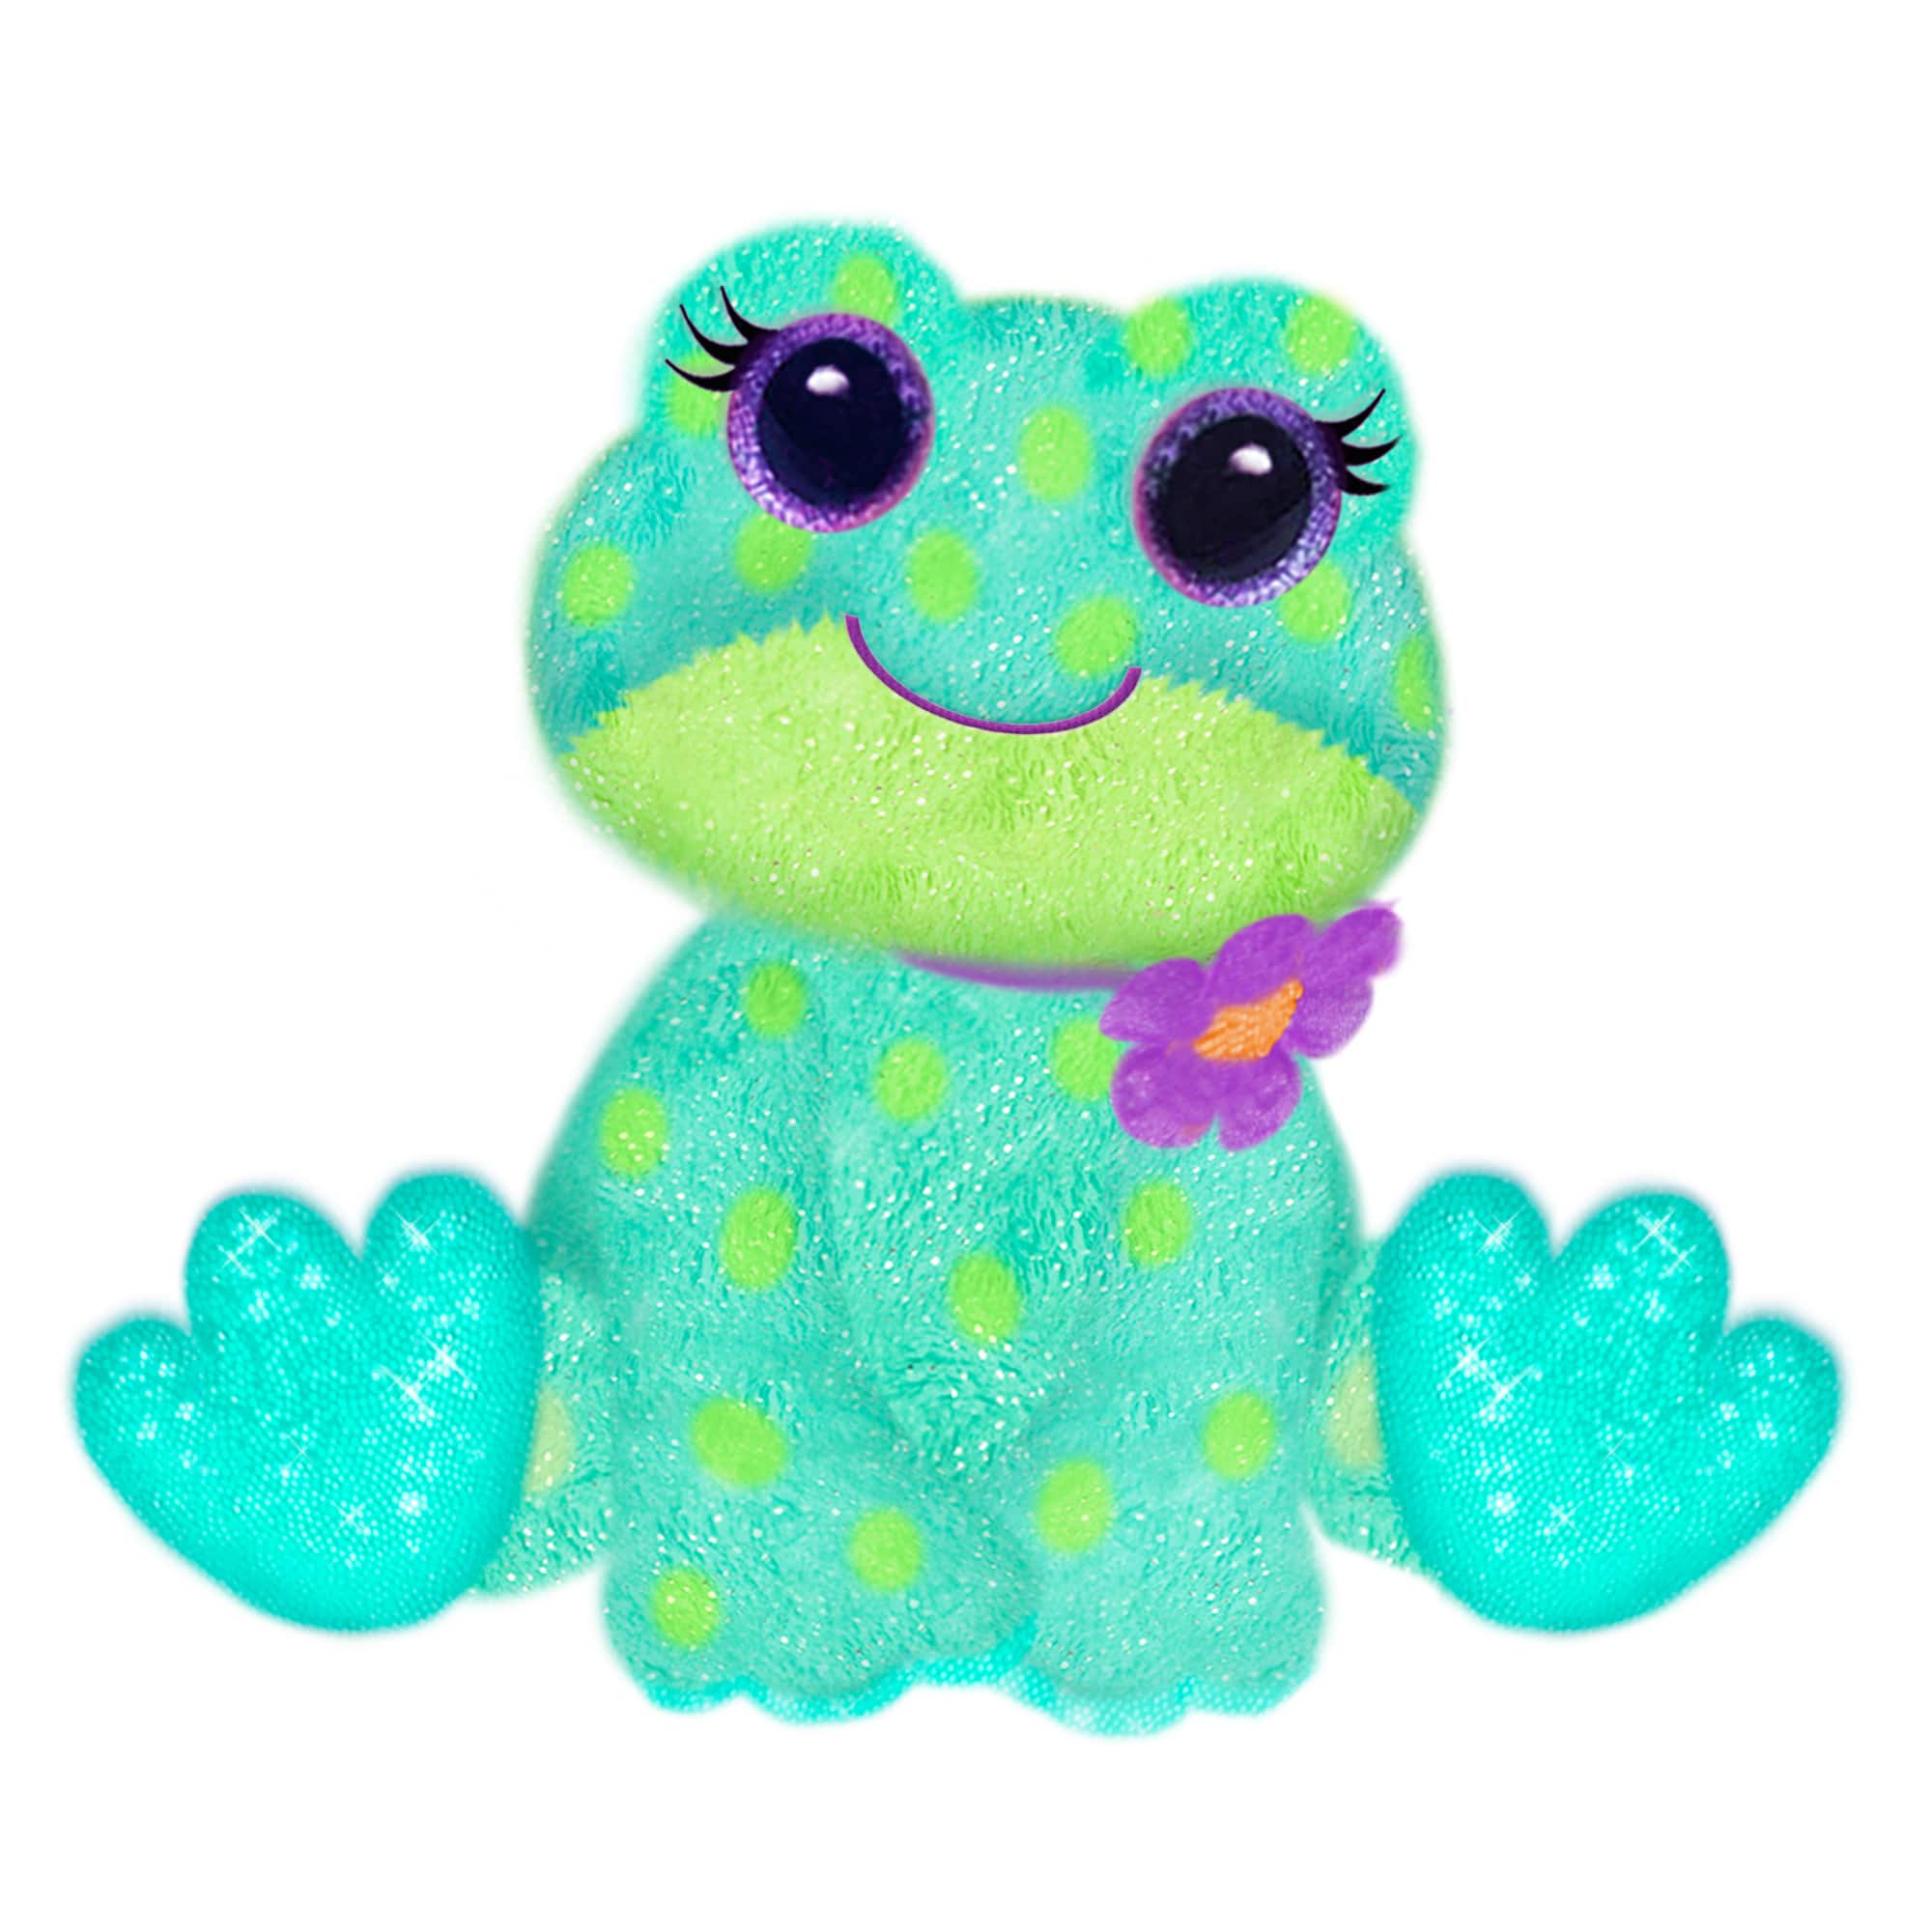 First and Main - FantaZOO 10 inch Plush, Felicia Frog